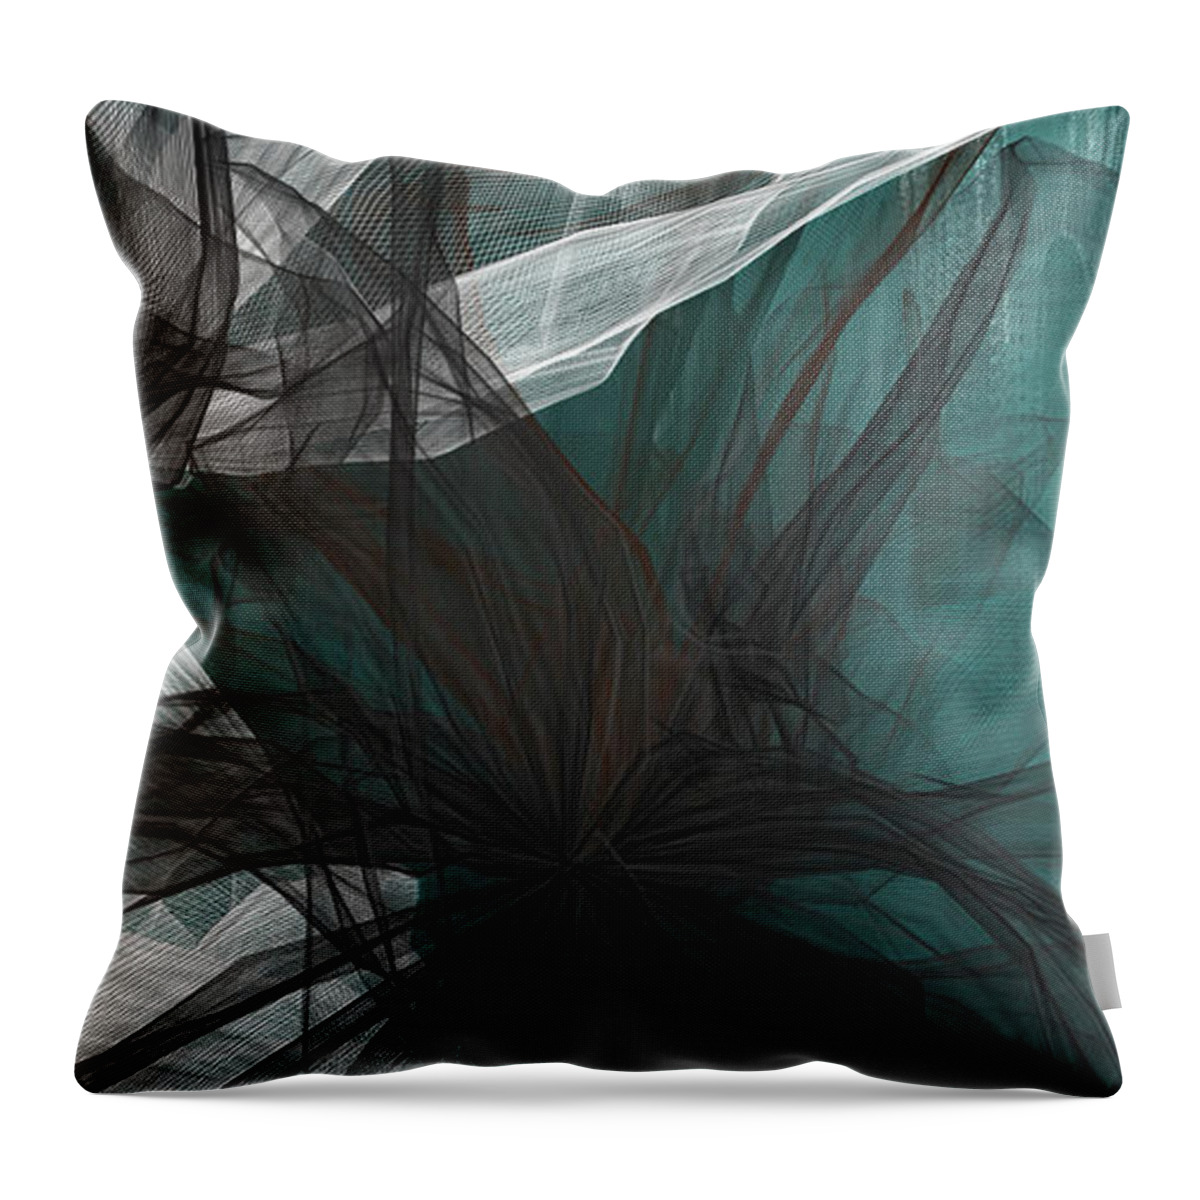 Turquoise Art Throw Pillow featuring the painting Touch Of Class - Black and Teal Art by Lourry Legarde